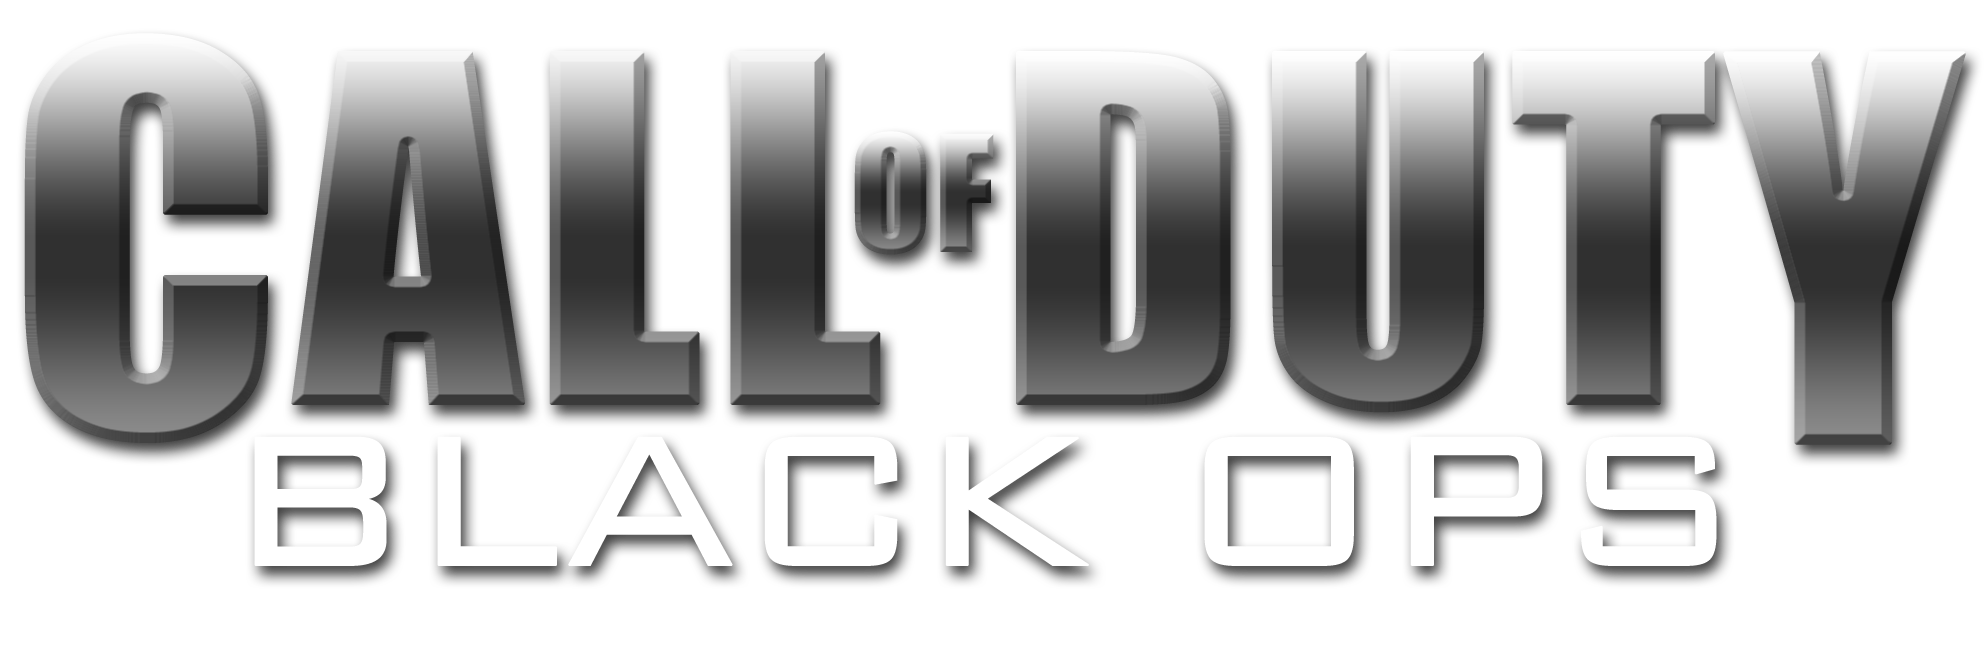 Call of Duty Black Ops PNG Transparent Image